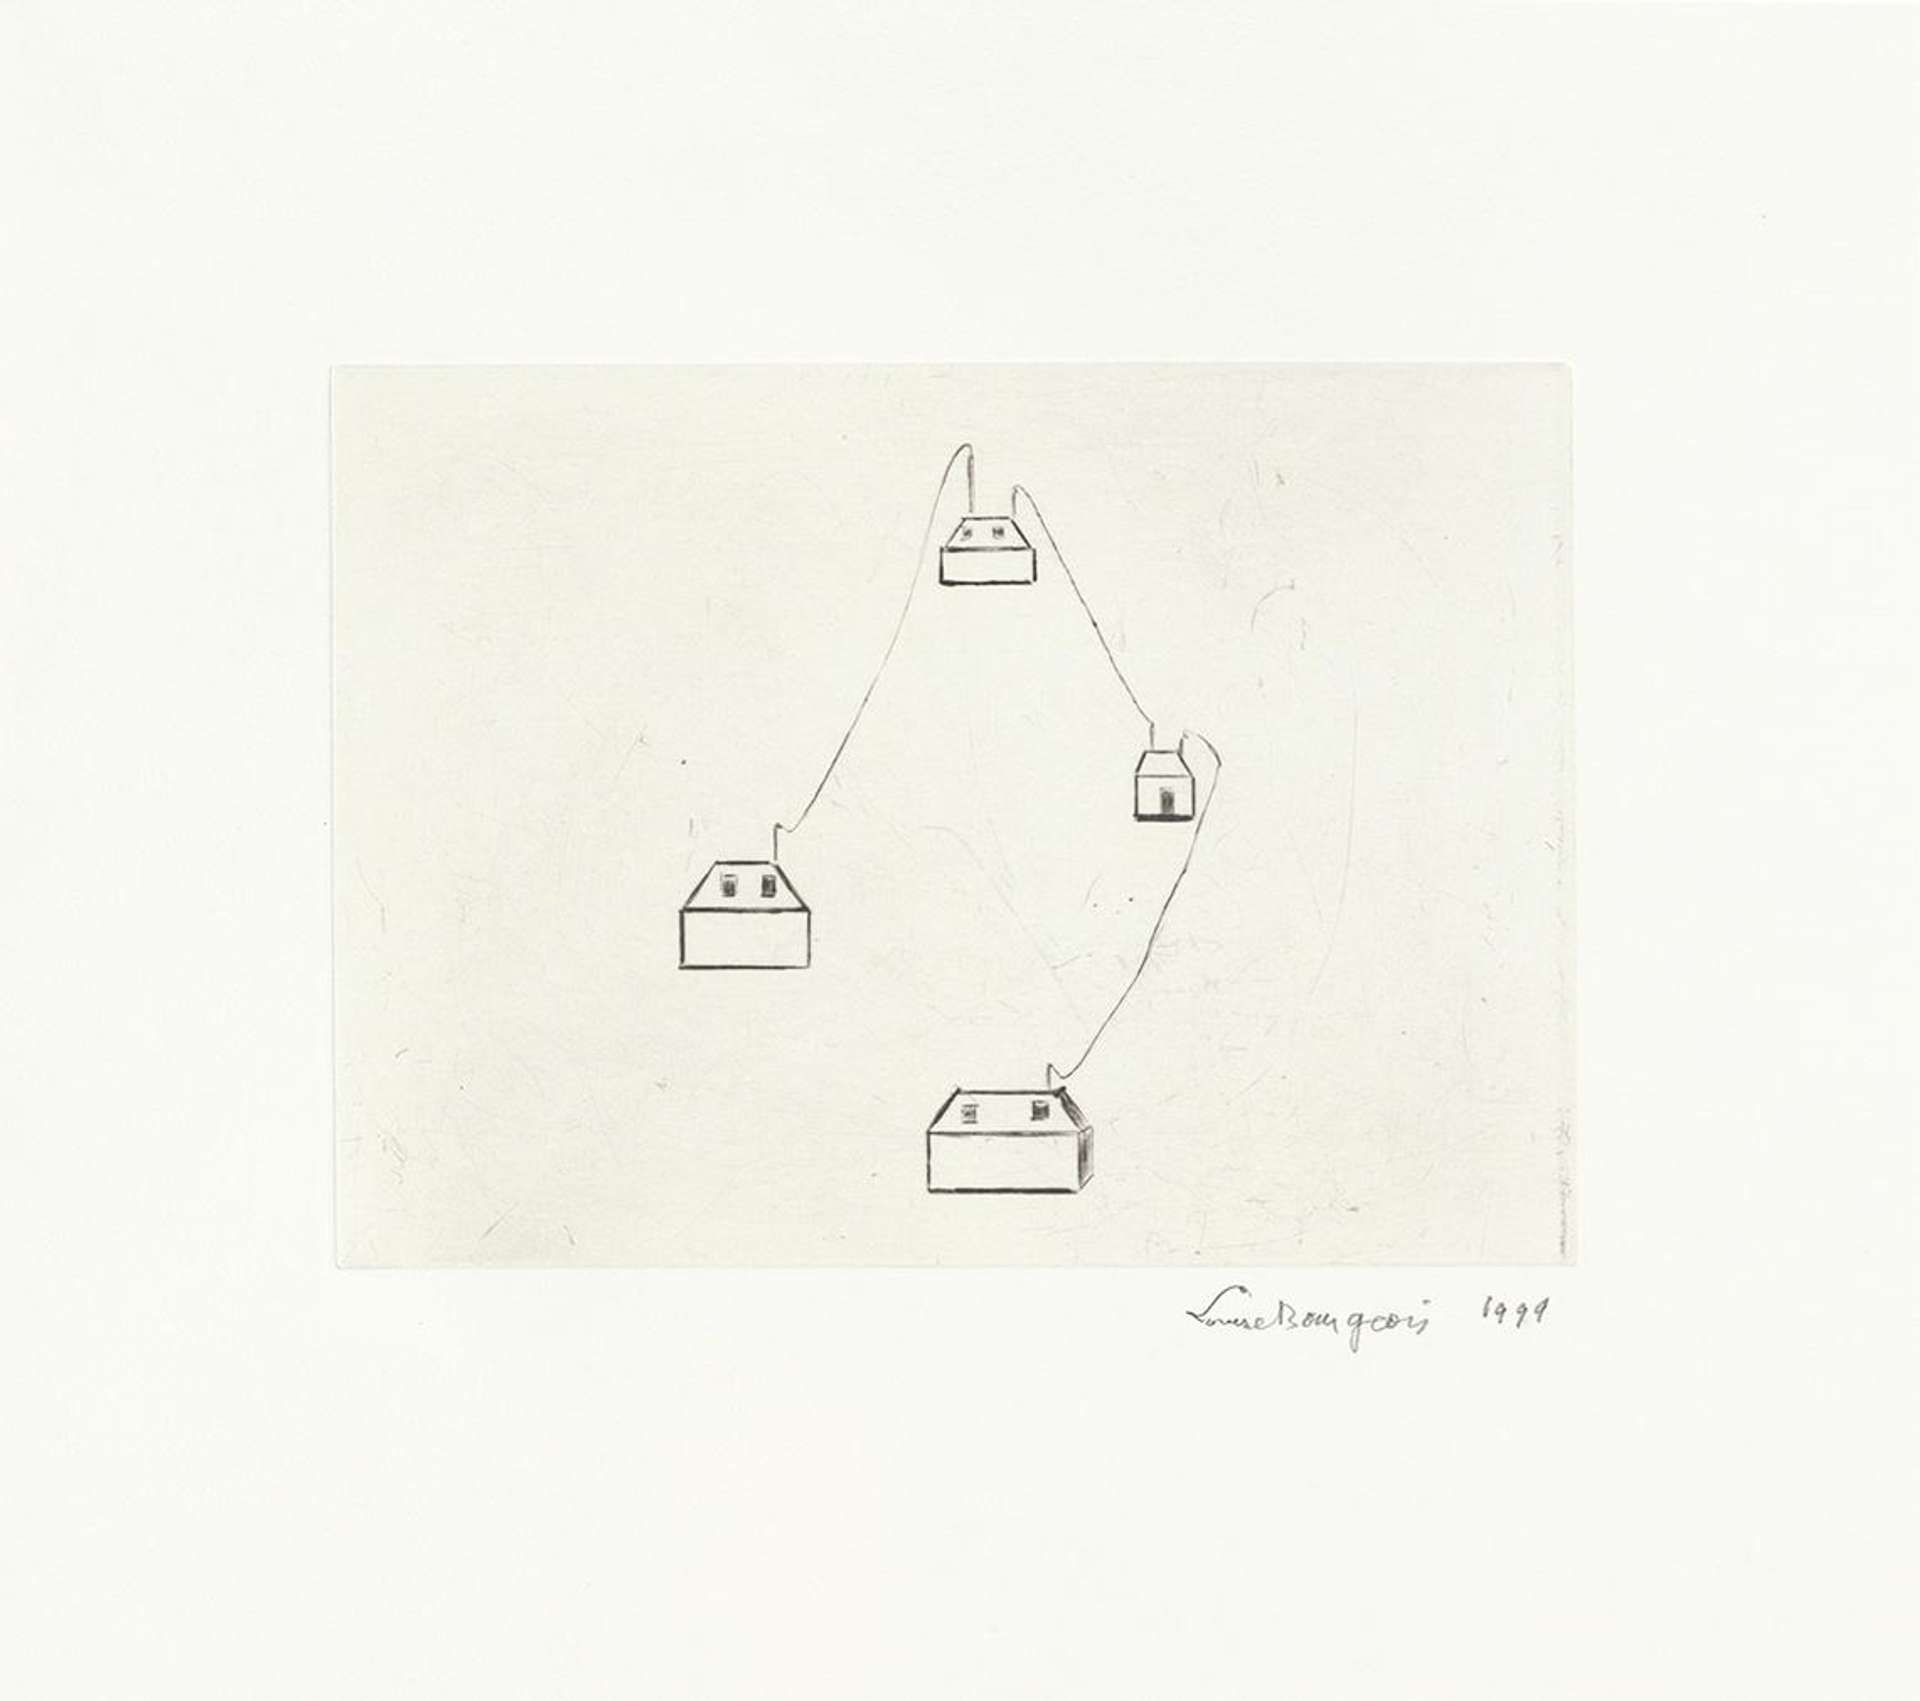 Louise Bourgeois’ Fences Are Obsolete. A drypoint print of four houses connected with faint lines.